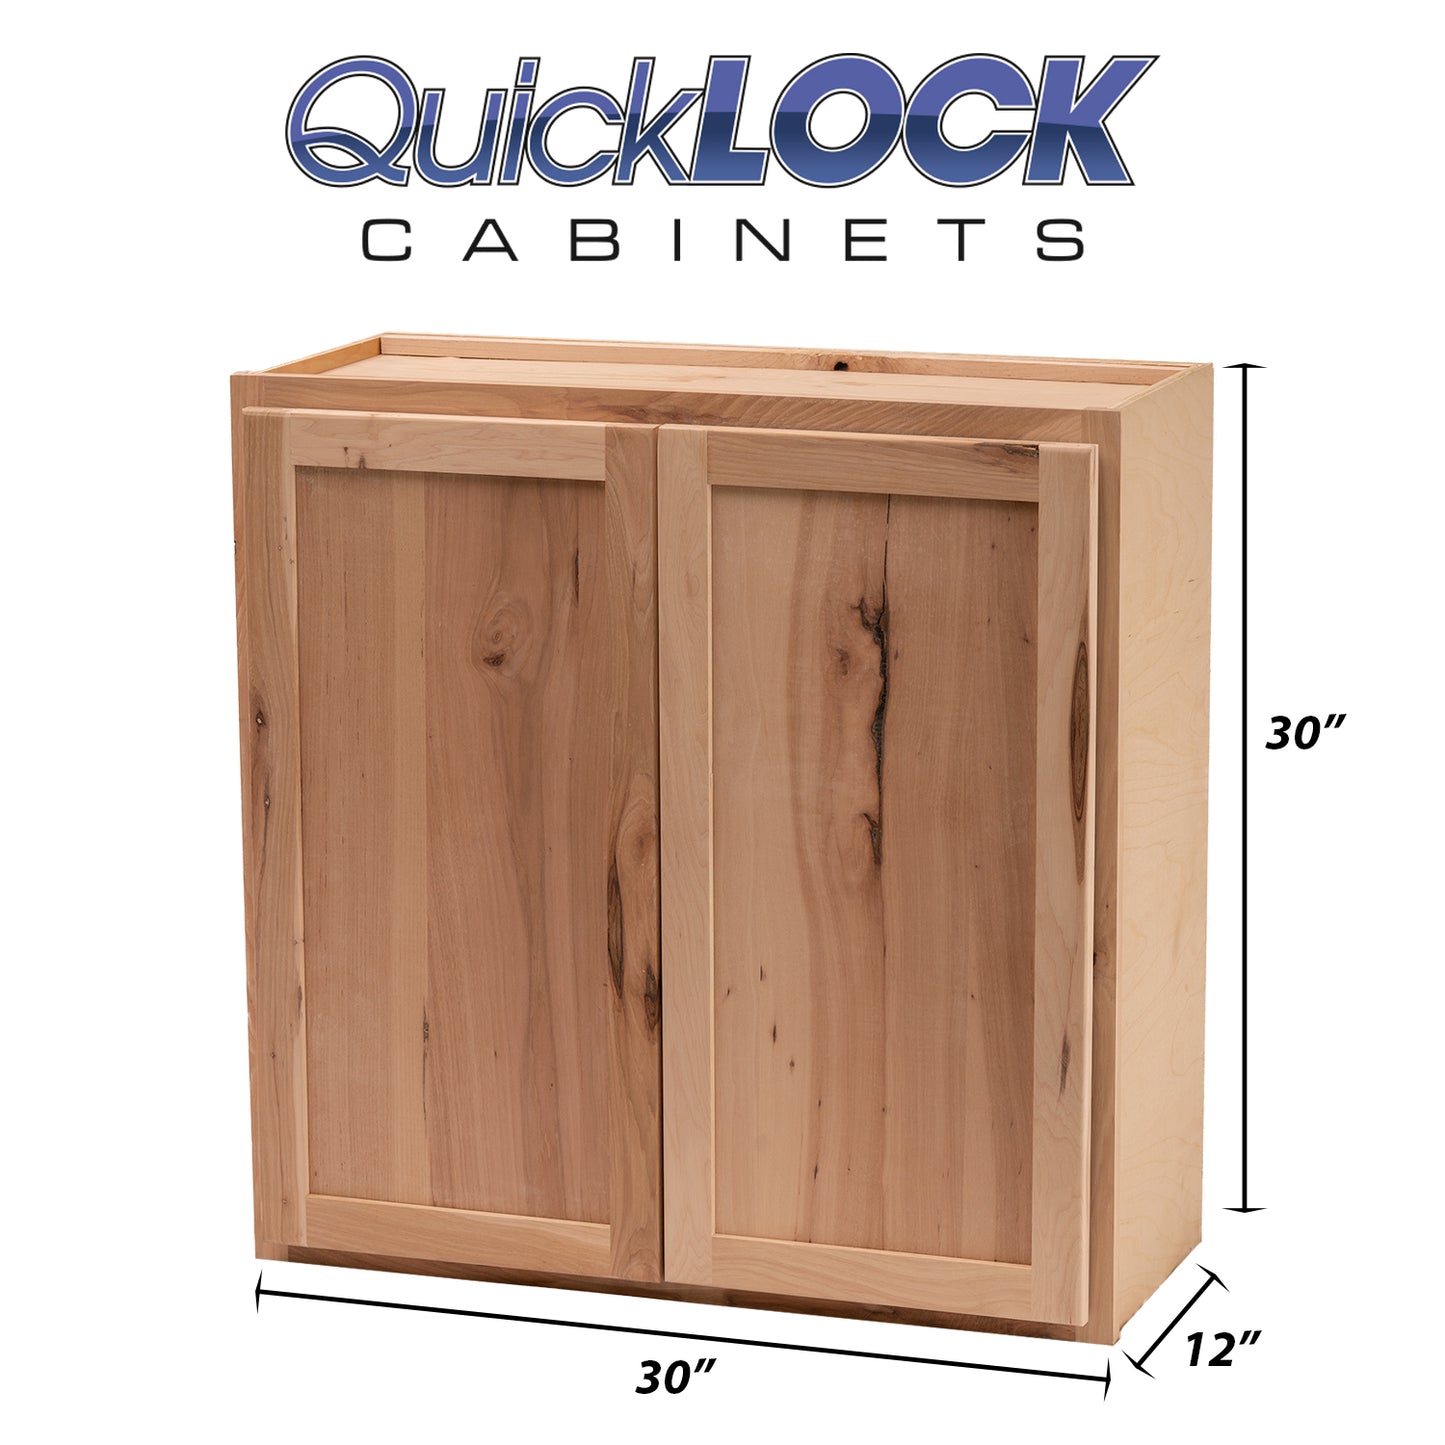 Quicklock RTA (Ready-to-Assemble) Raw Hickory 30"Wx30"Hx12"D Wall Cabinet